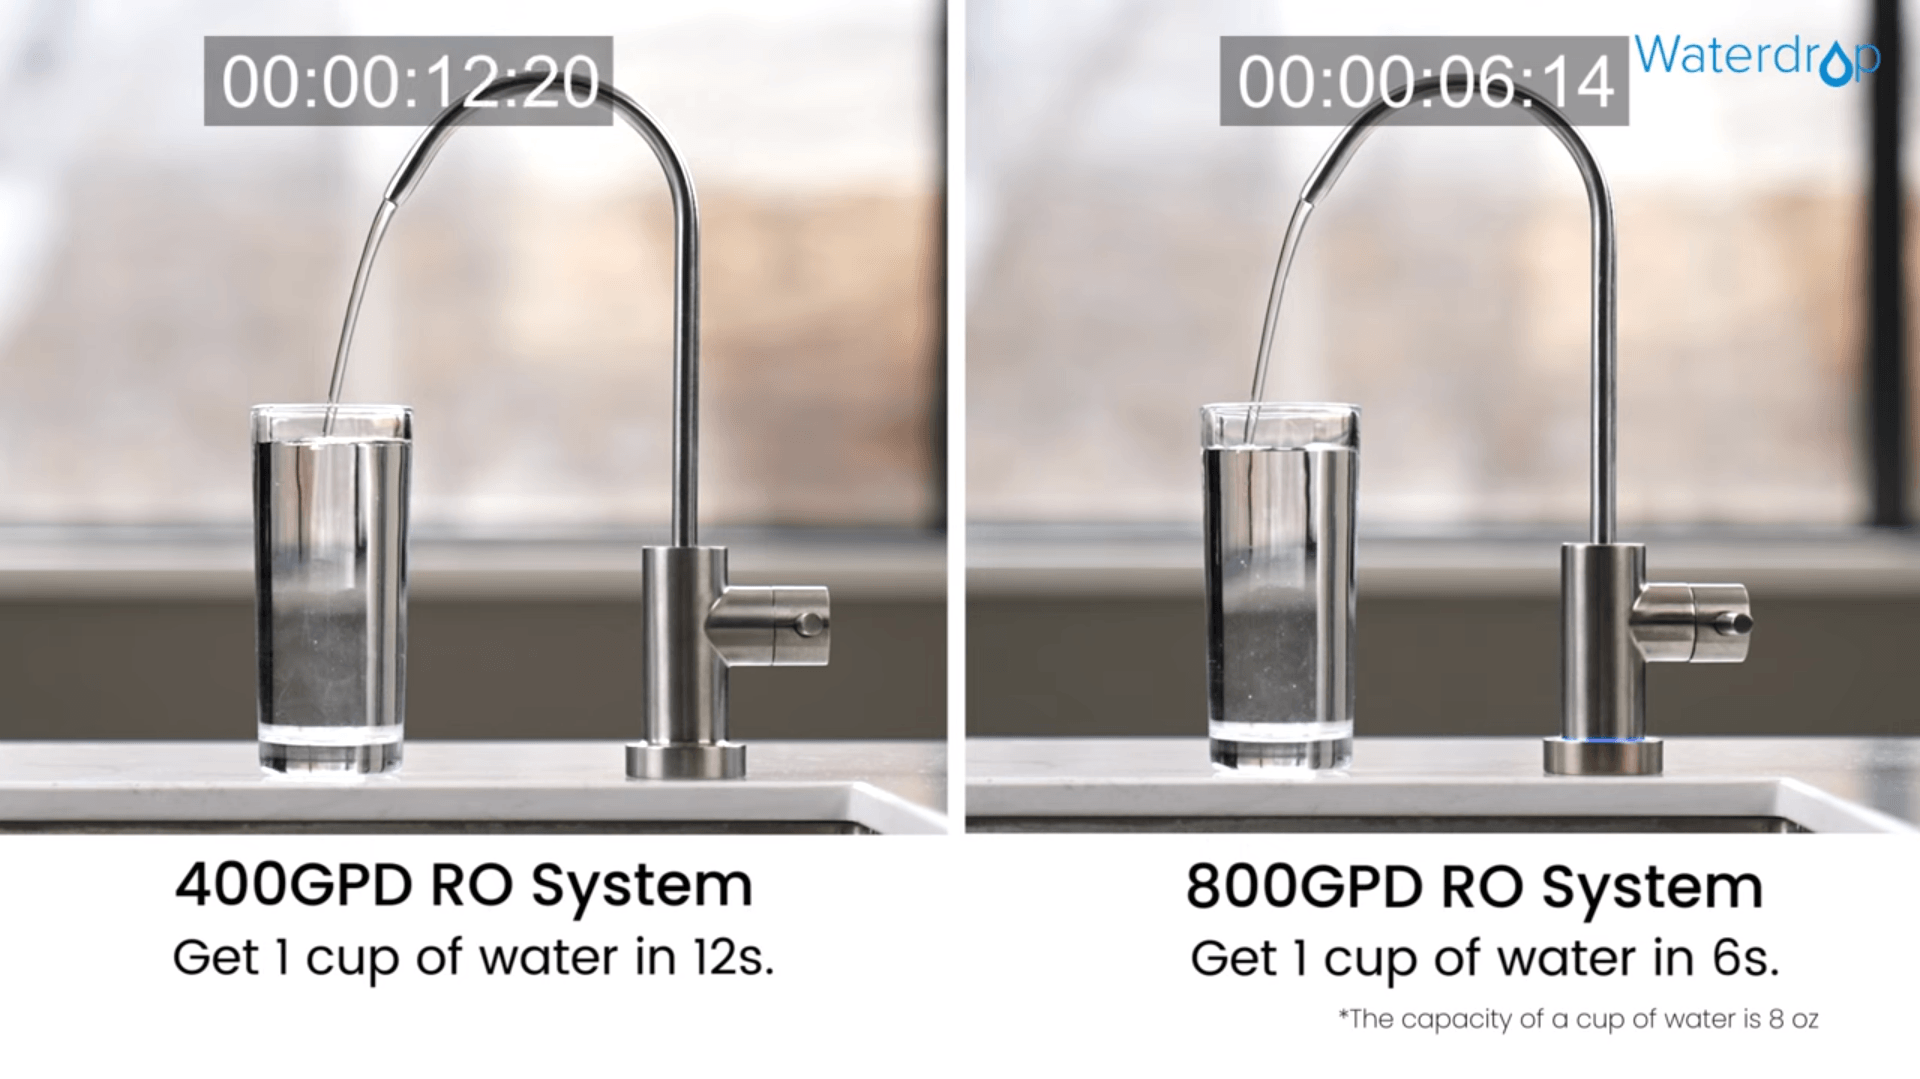 Smart Faucet for Waterdrop G3P800 & G3 RO Systems